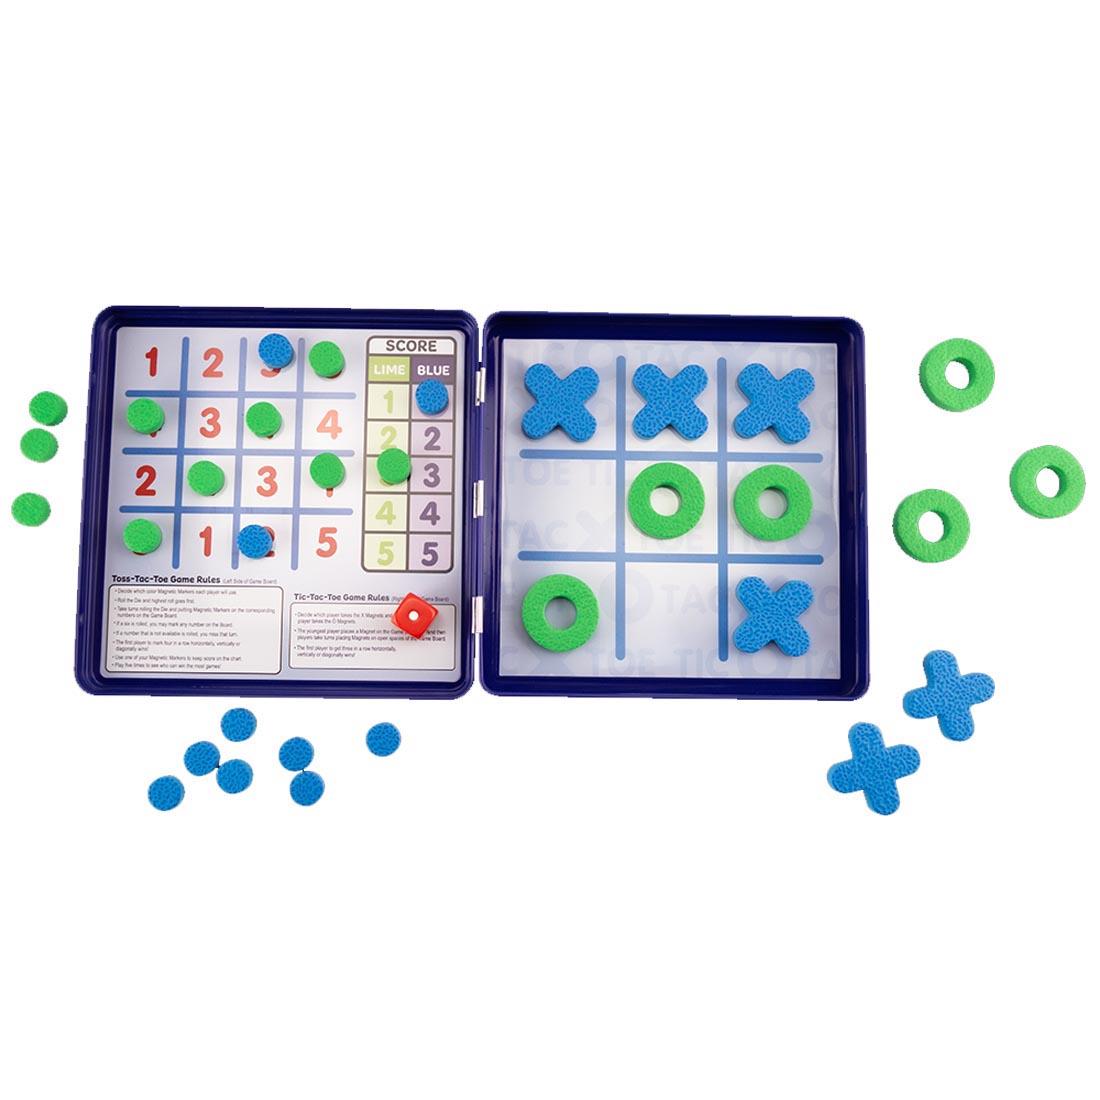 Contents of Tic-Tac-Toe Take 'N' Play Anywhere Magnetic Game